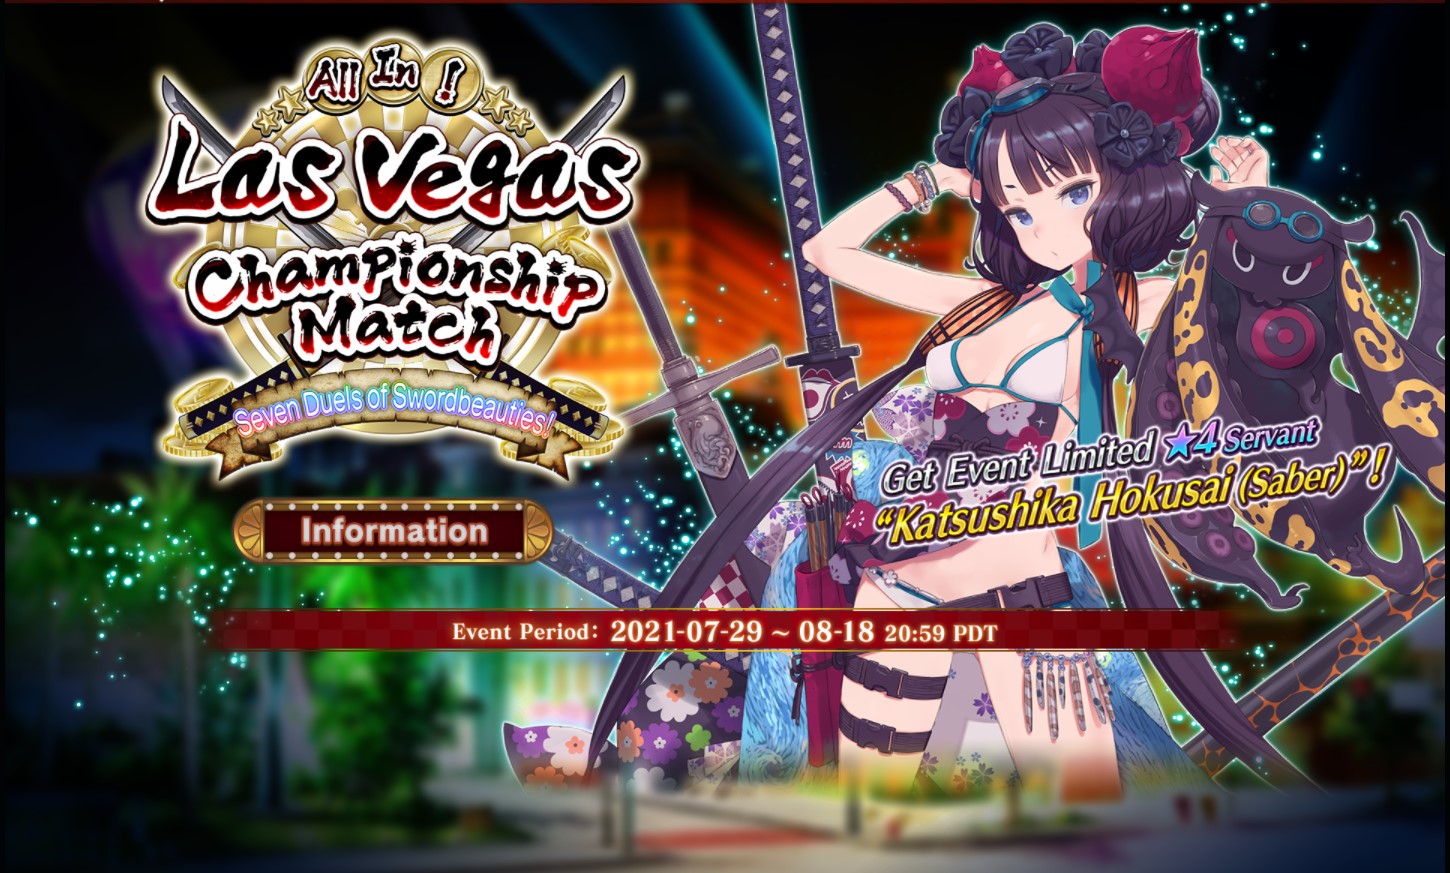 All In Fate Go Summer 21 Las Vegas Championship Match Event Guide On Pc Noxplayer